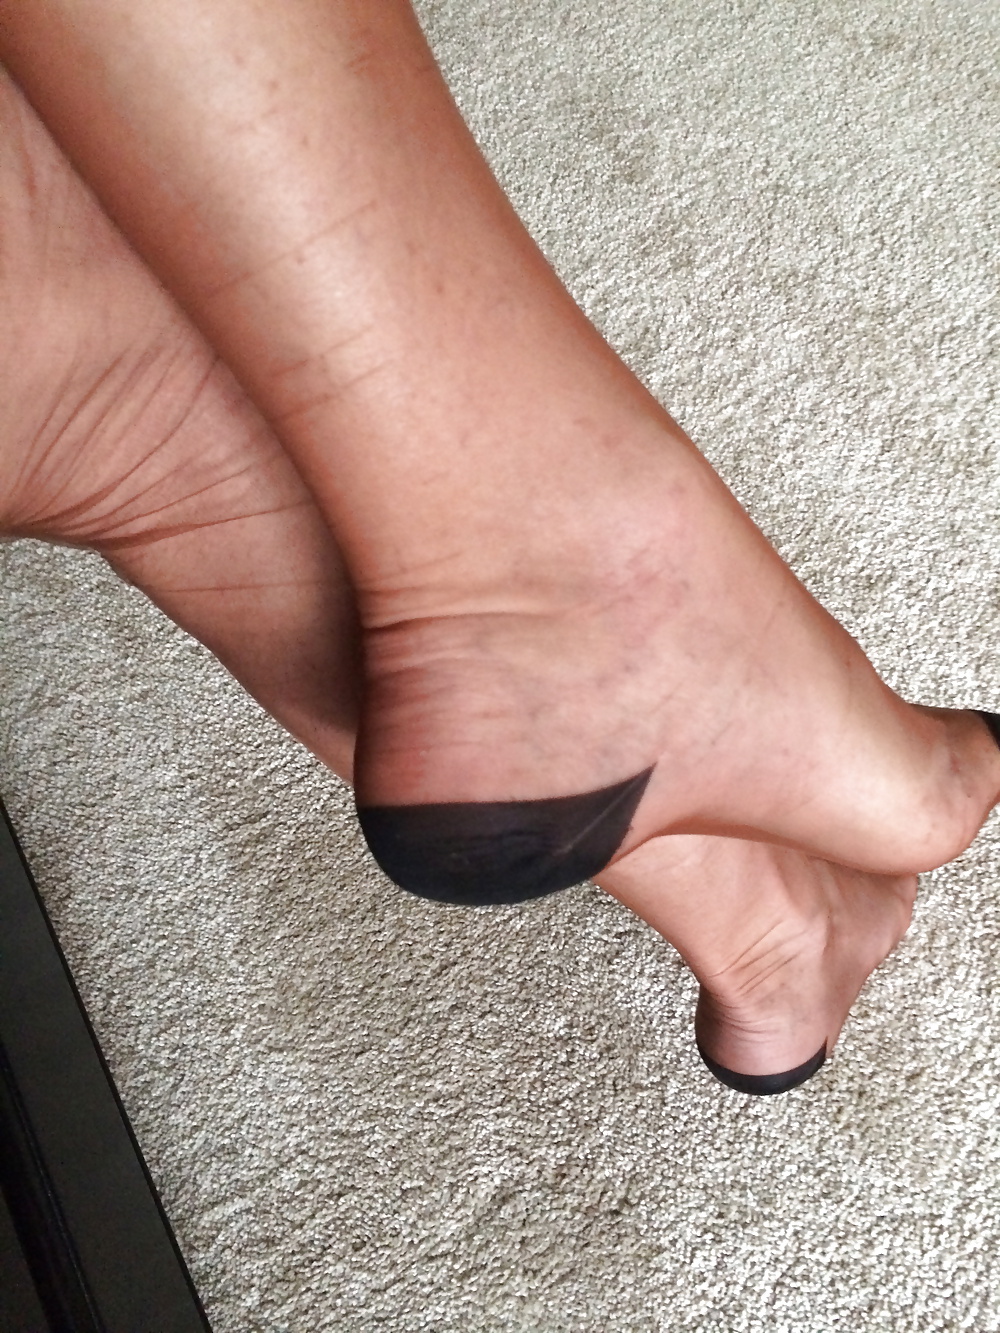 For the foot fetish #29225235